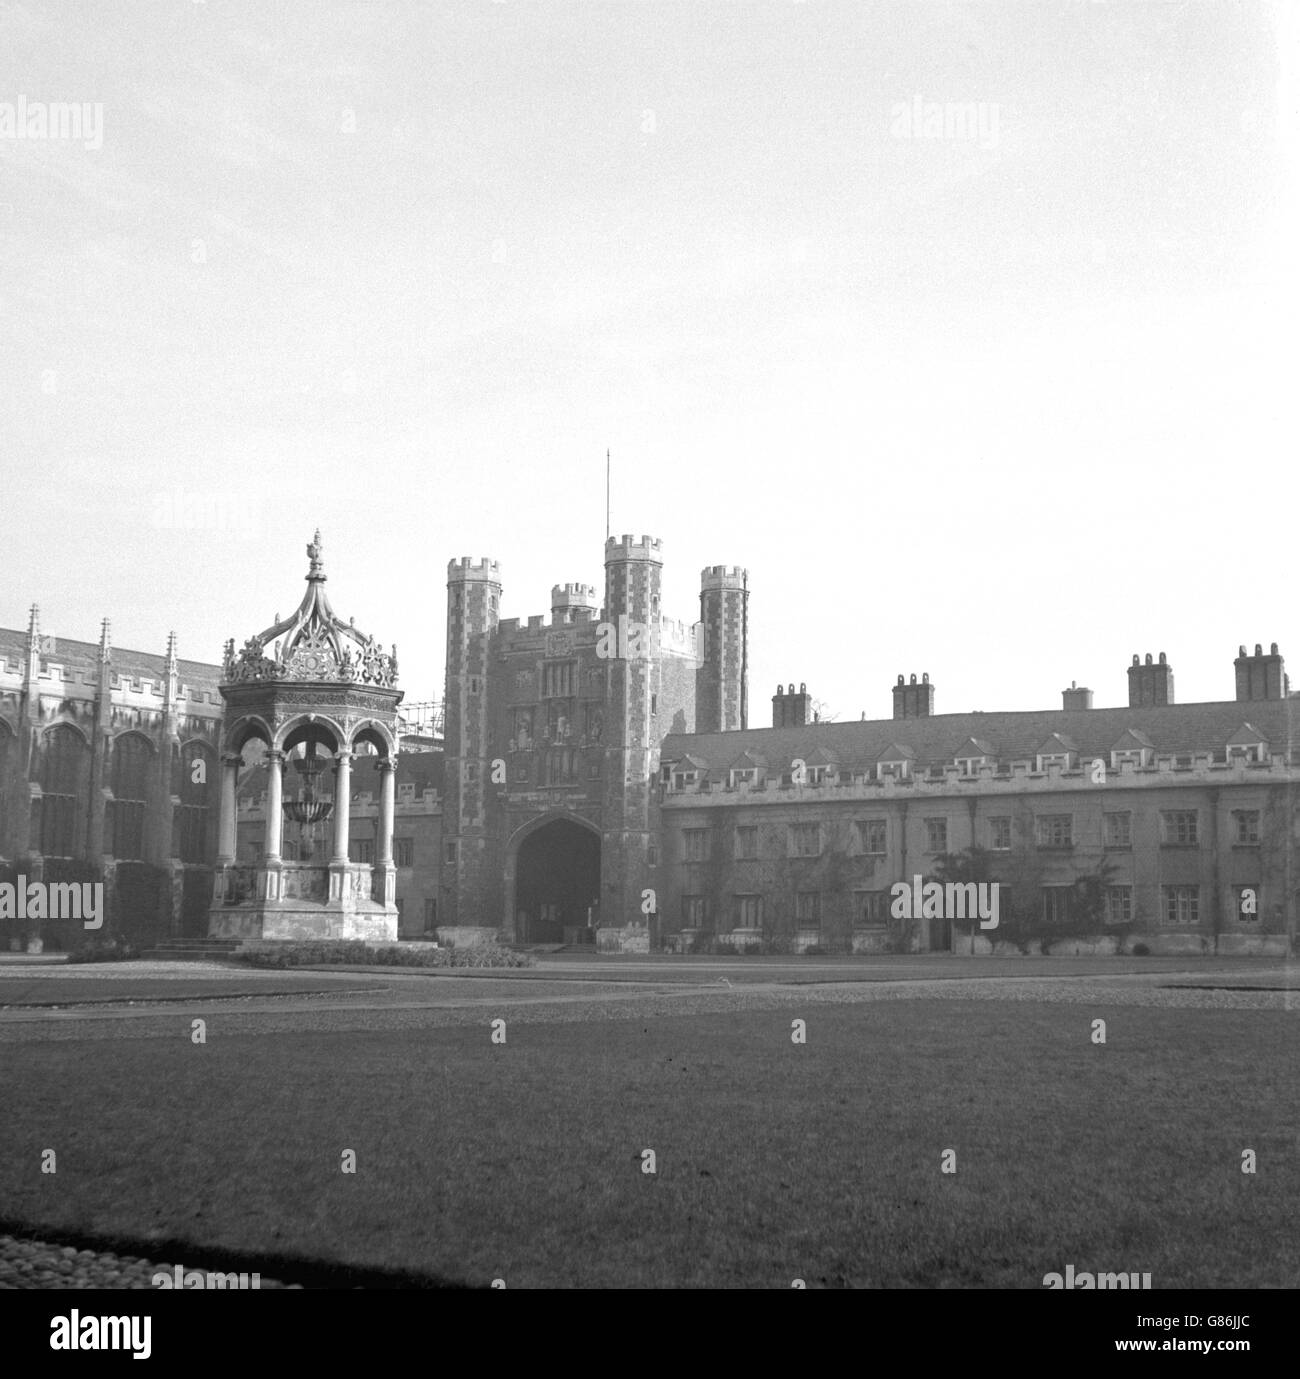 The Great Court at Trinity College, Cambridge, where Prince Charles is to become an undergraduate in October. Most of the Great Court was built between 1593 and 1615, when Thomas Nevile was Master of the College. The Renaissance fountain, first erected in 1602, is supplied with water by a conduit laid by Franciscan monks. Stock Photo